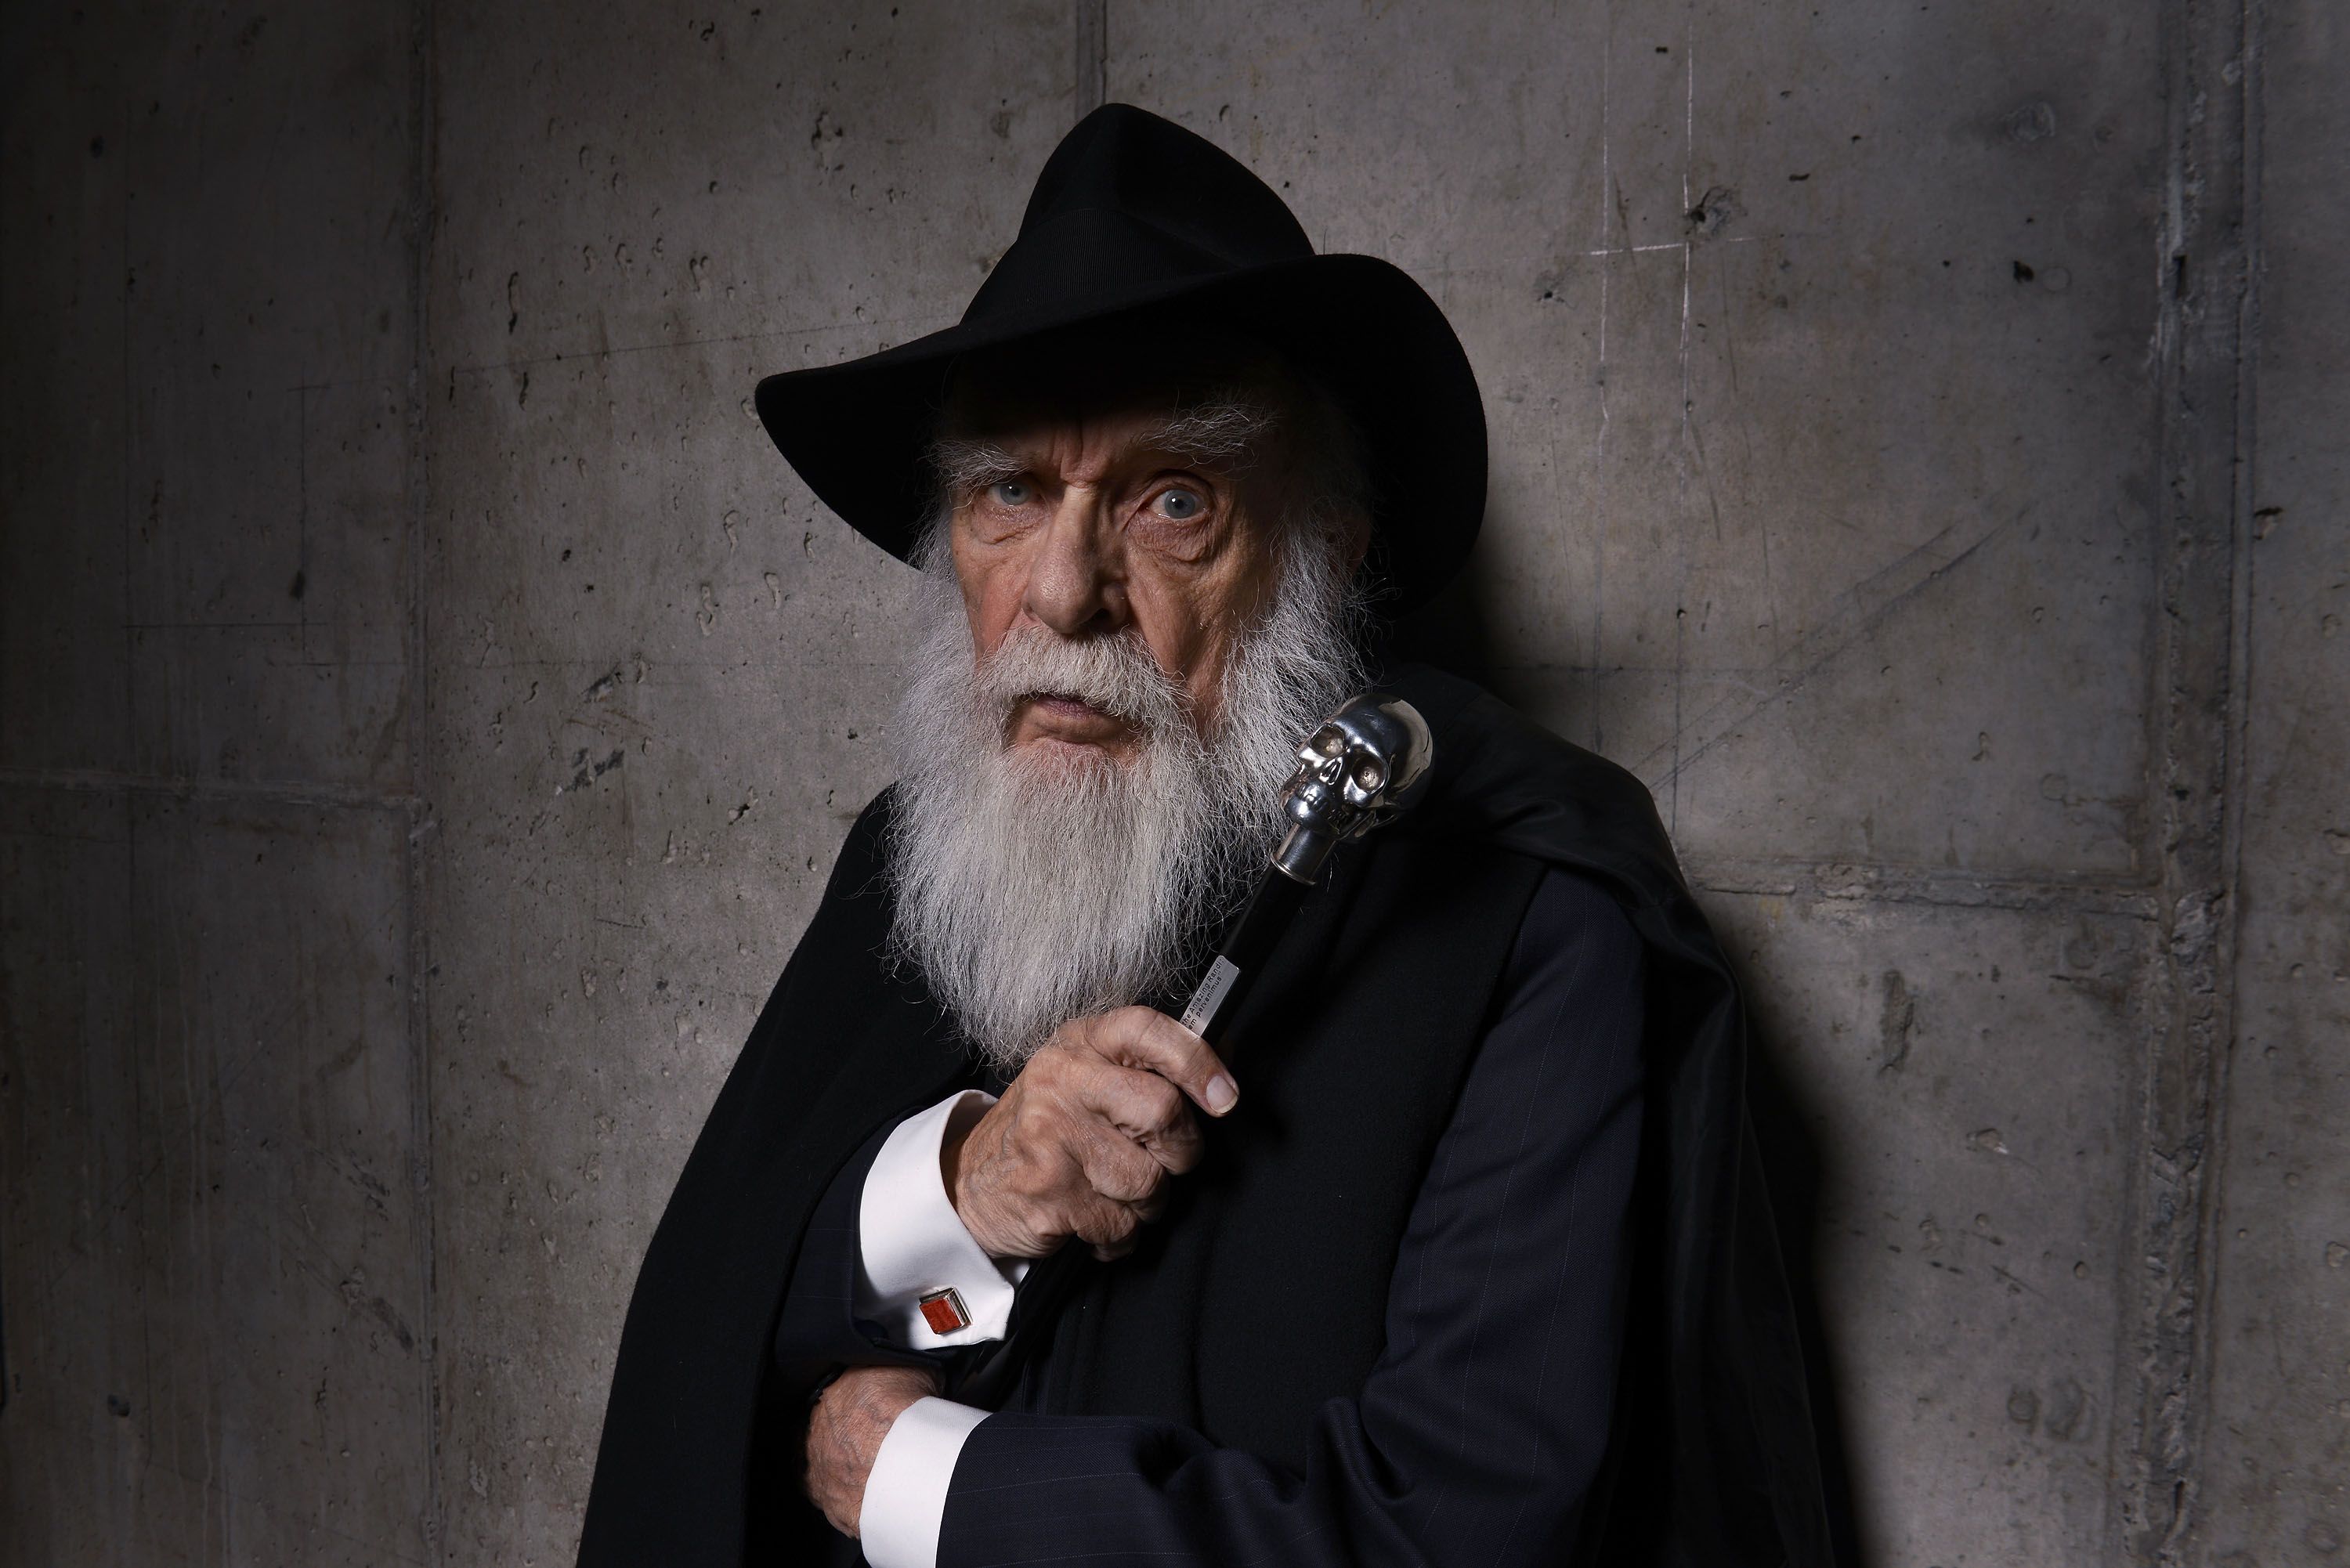 James "The Amazing" Randi poses for the Tribeca Film Festival on April 21, 2014, in New York City | Photo: Larry Busacca/Getty Images